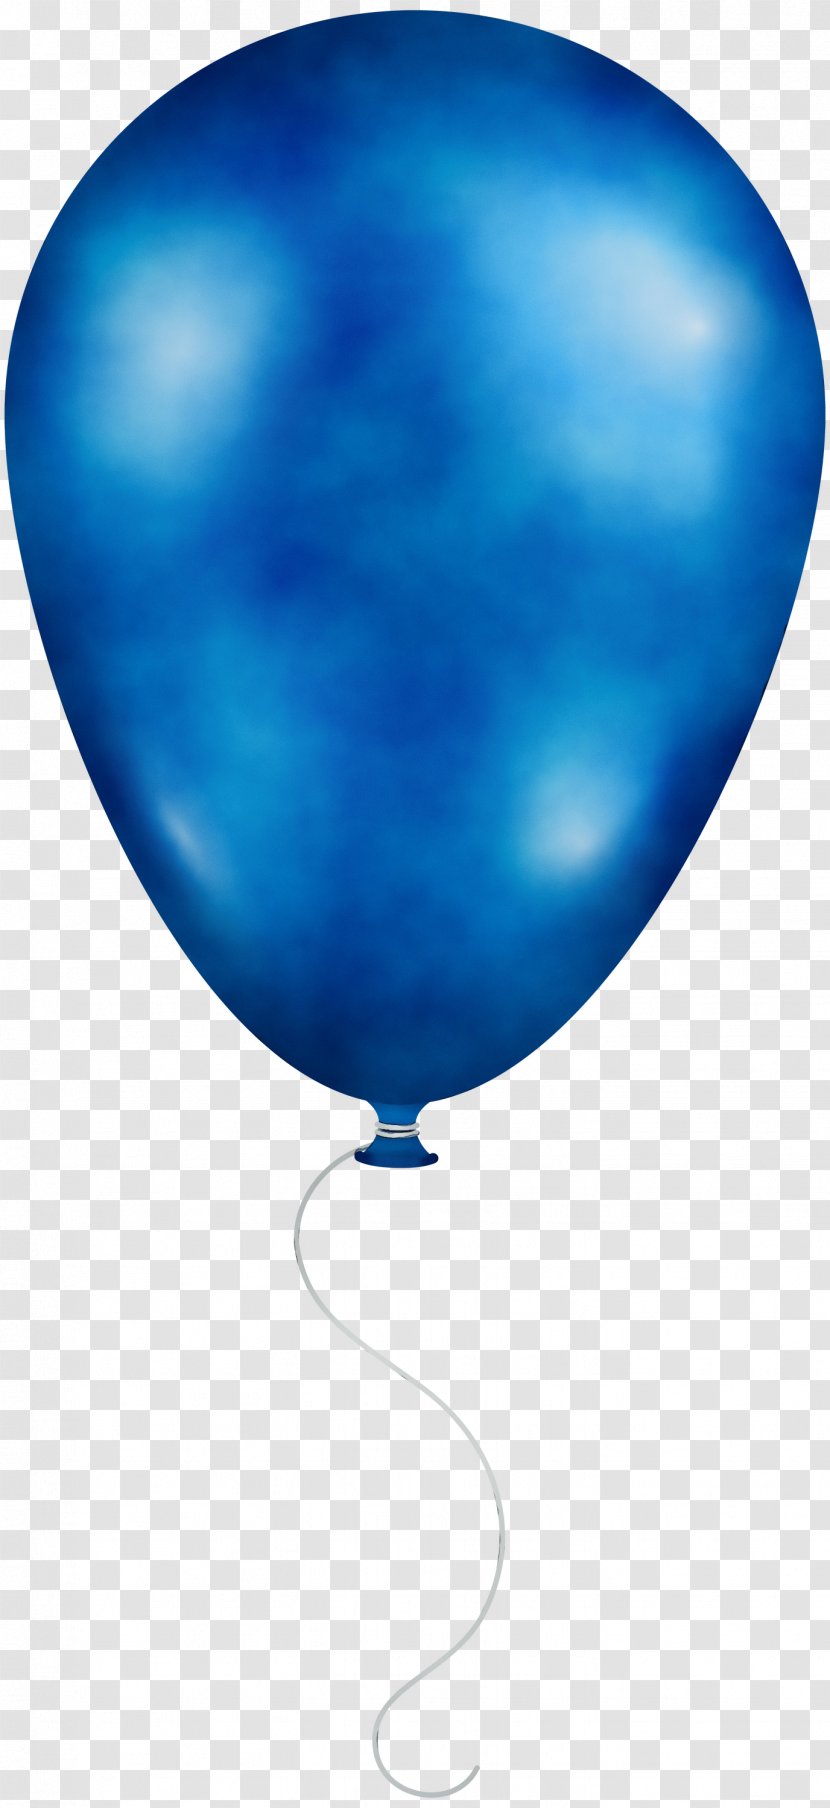 Hot Air Balloon Watercolor - Party Supply - Toy Transparent PNG